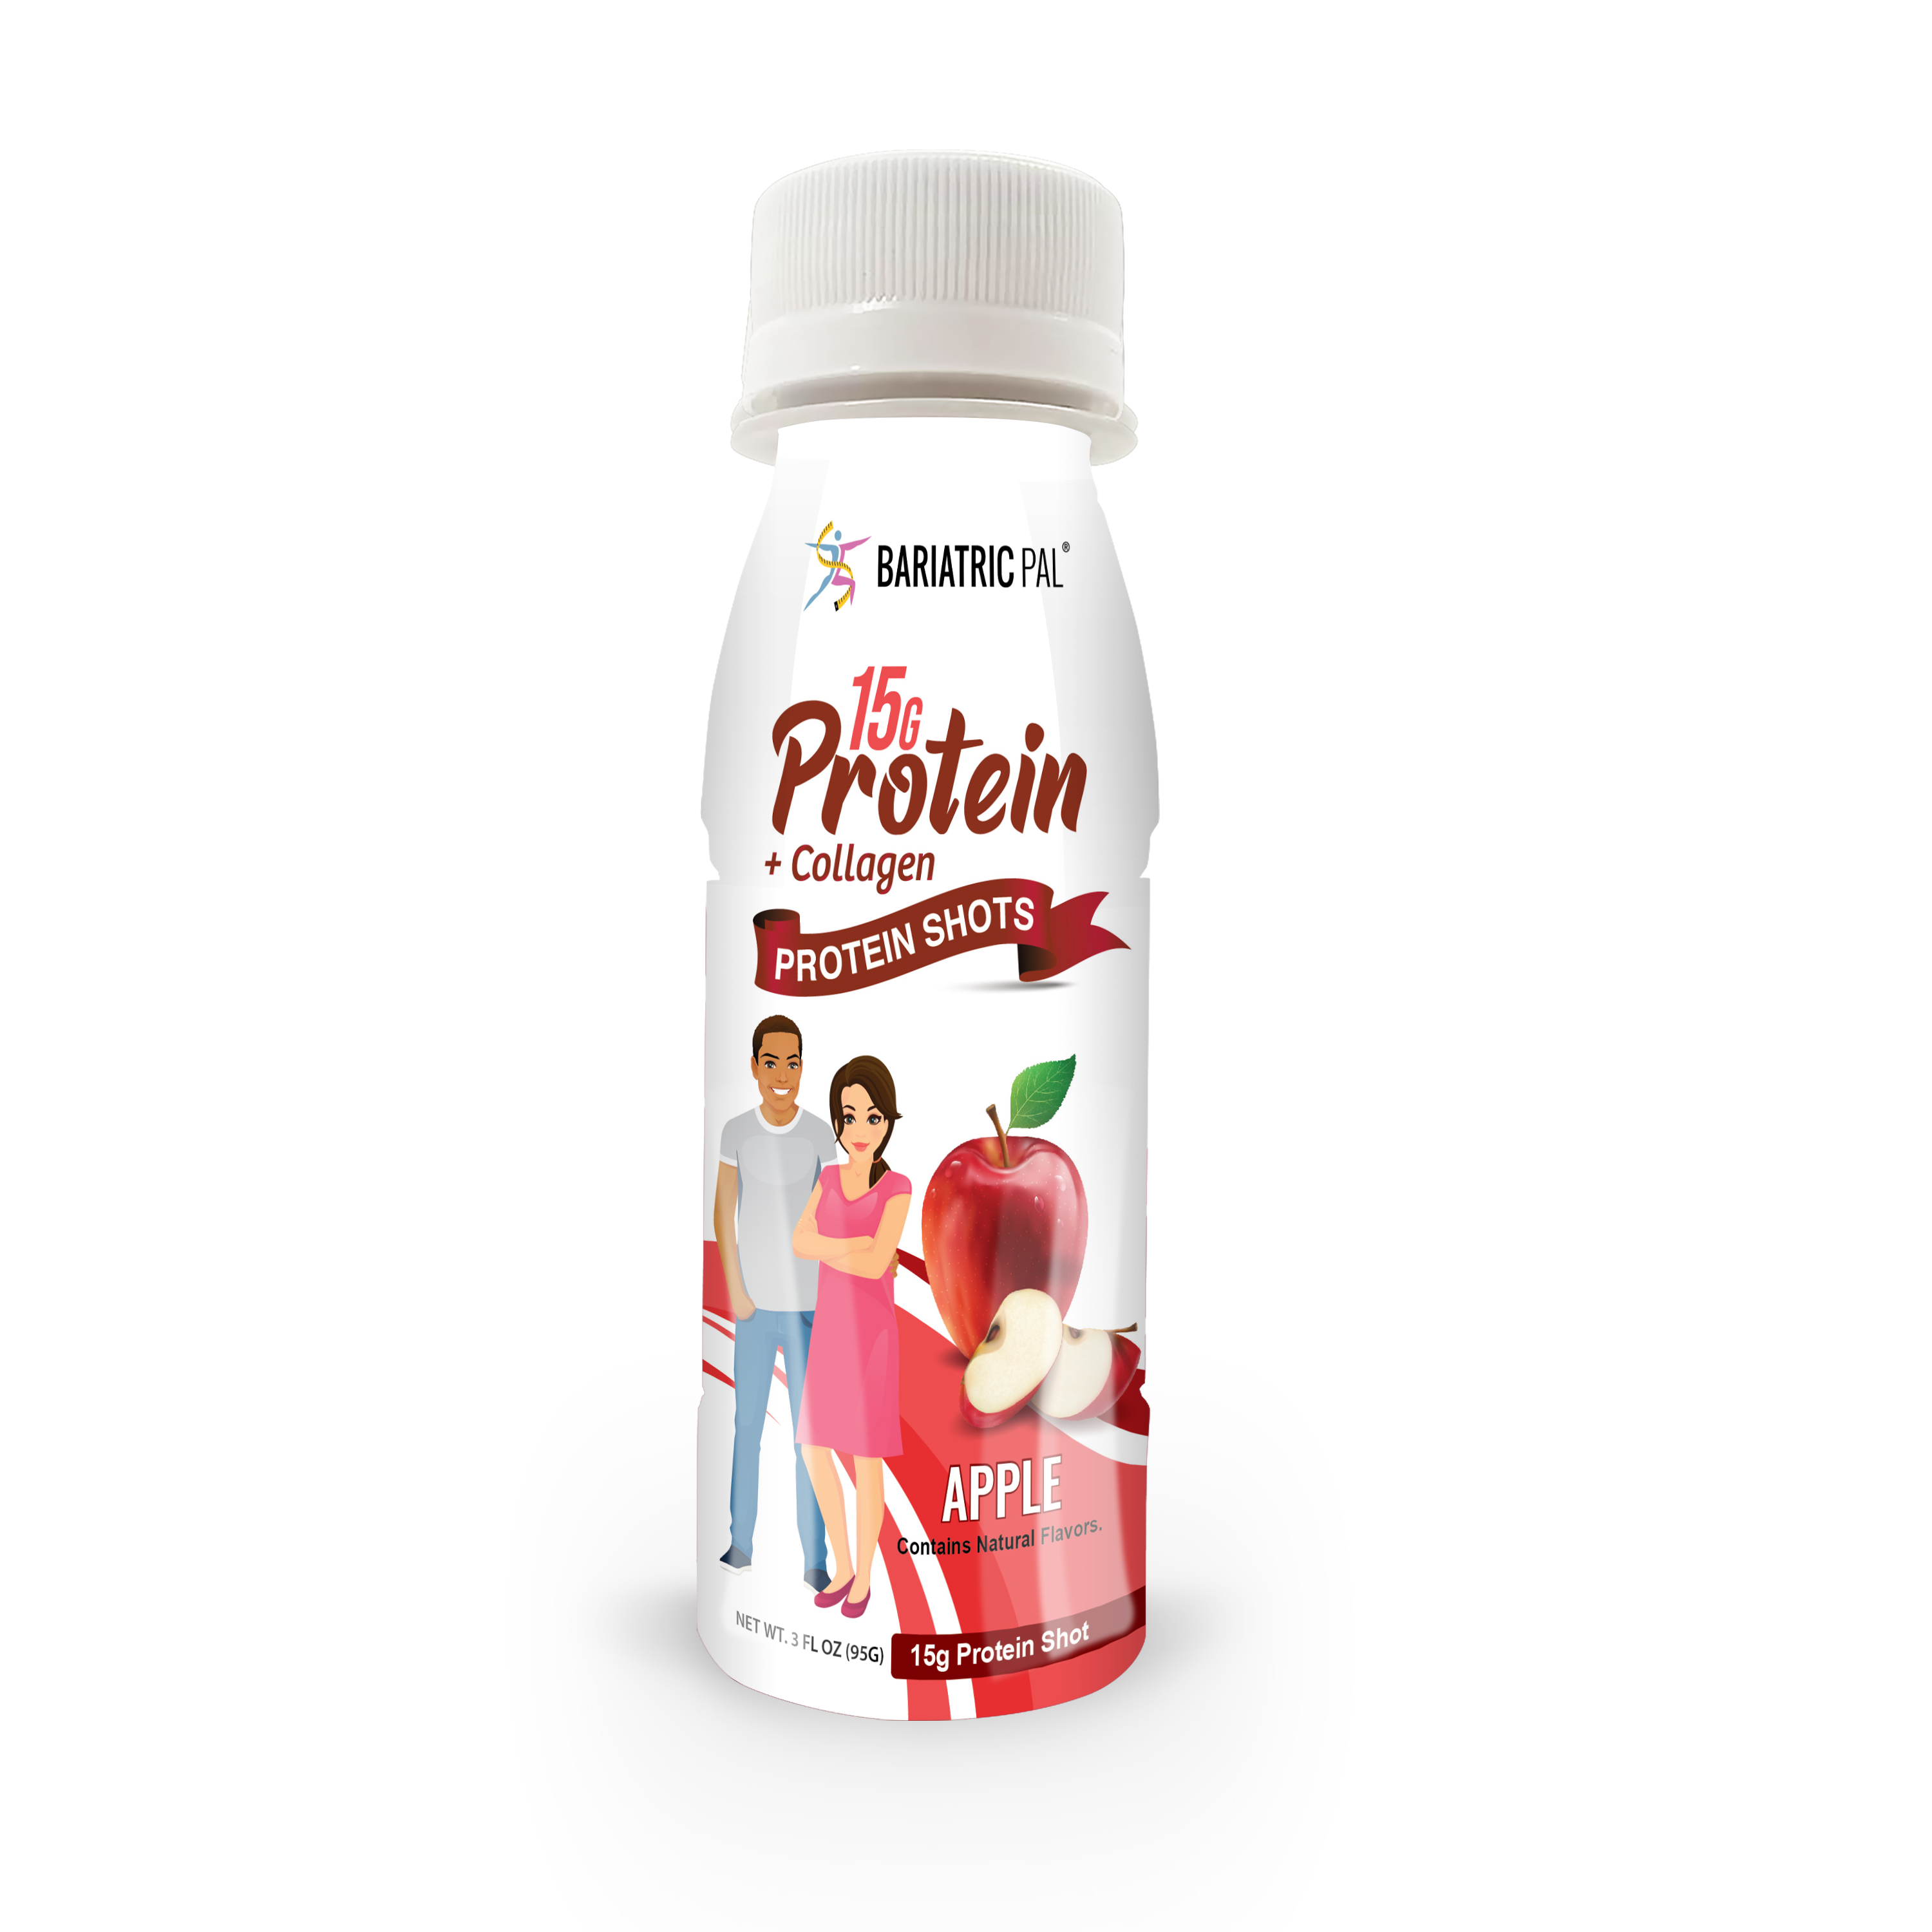 BariatricPal 15g Whey & Collagen Complete Protein Shots - Apple